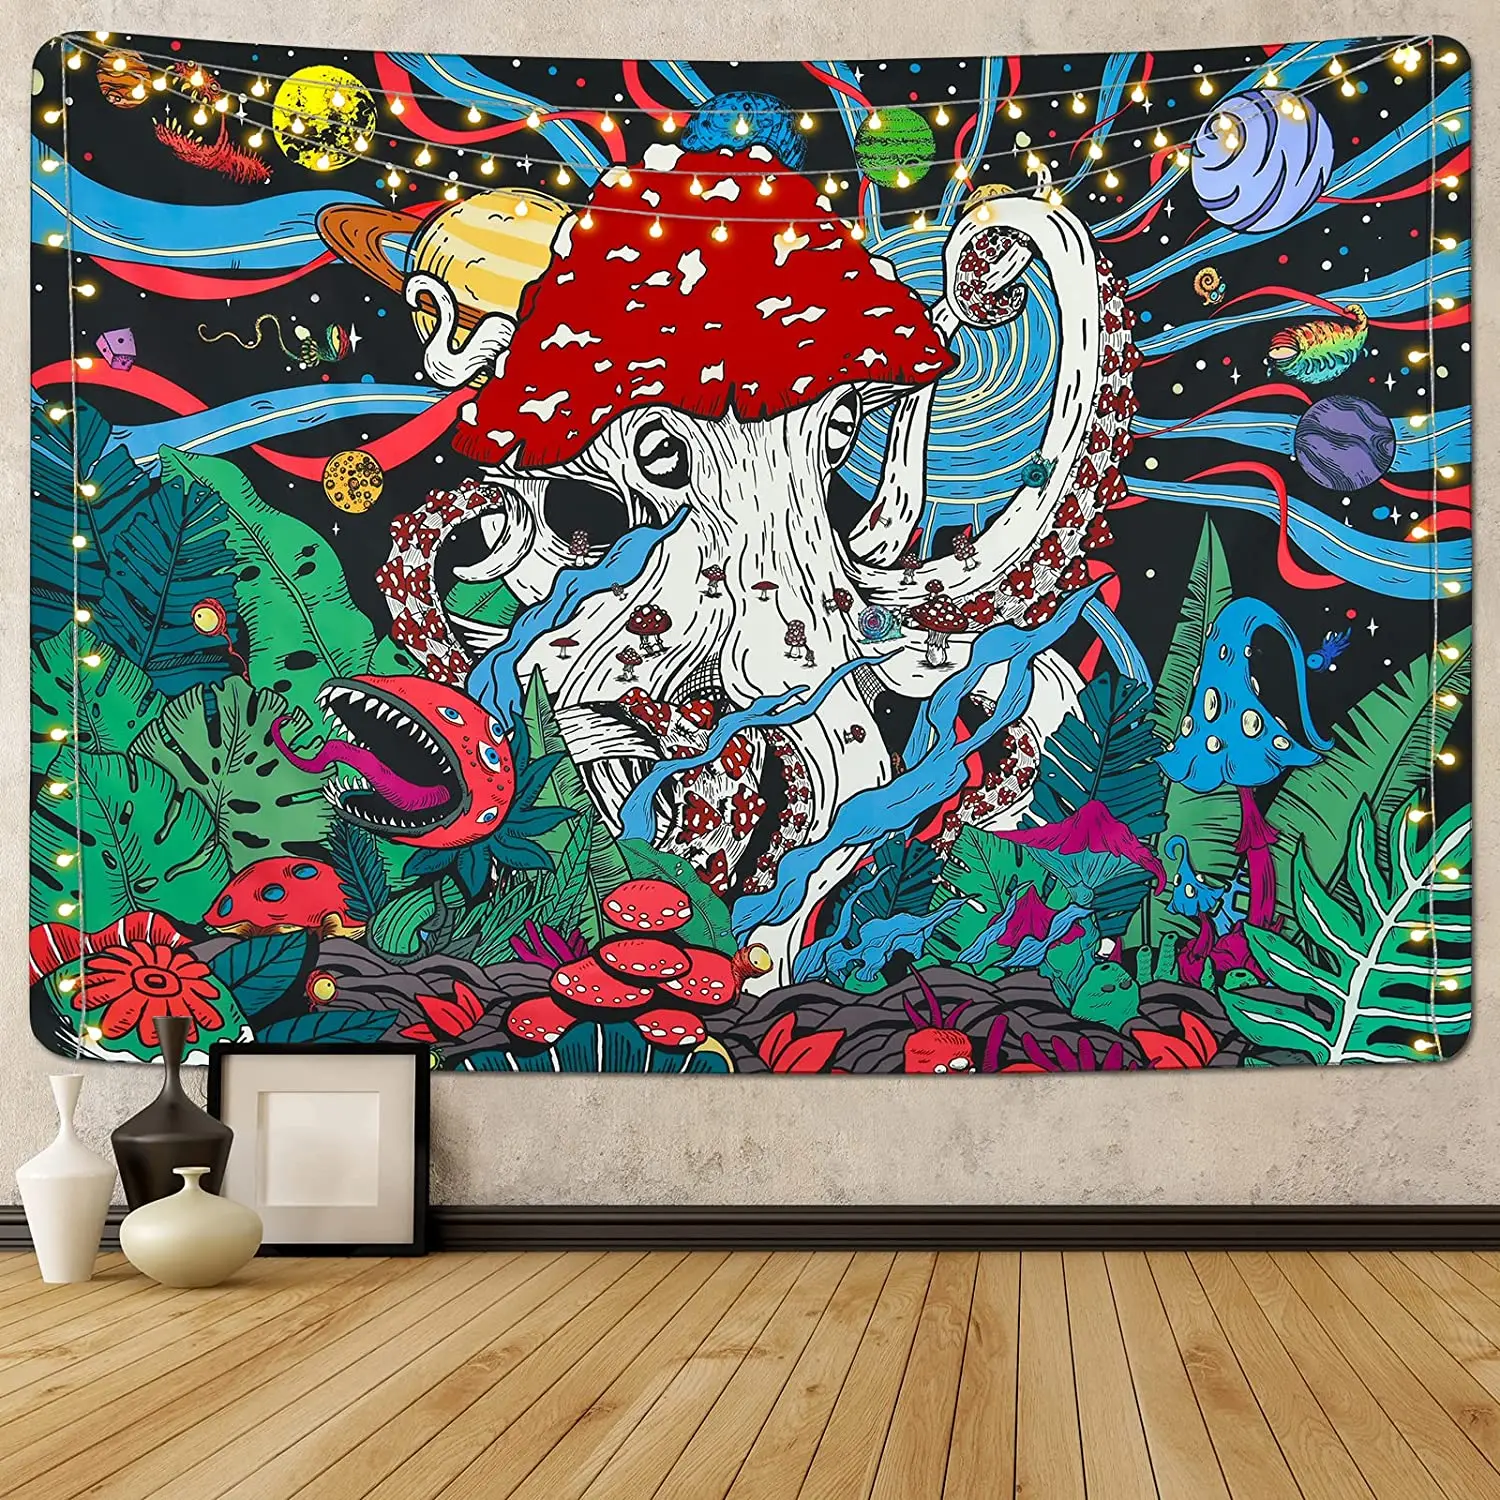 

Mushroom Tapestry Planets Tapestries Plants Monster Octopus Aesthethic Art Space Galaxy Tapestry Wall Hanging for Room Decor